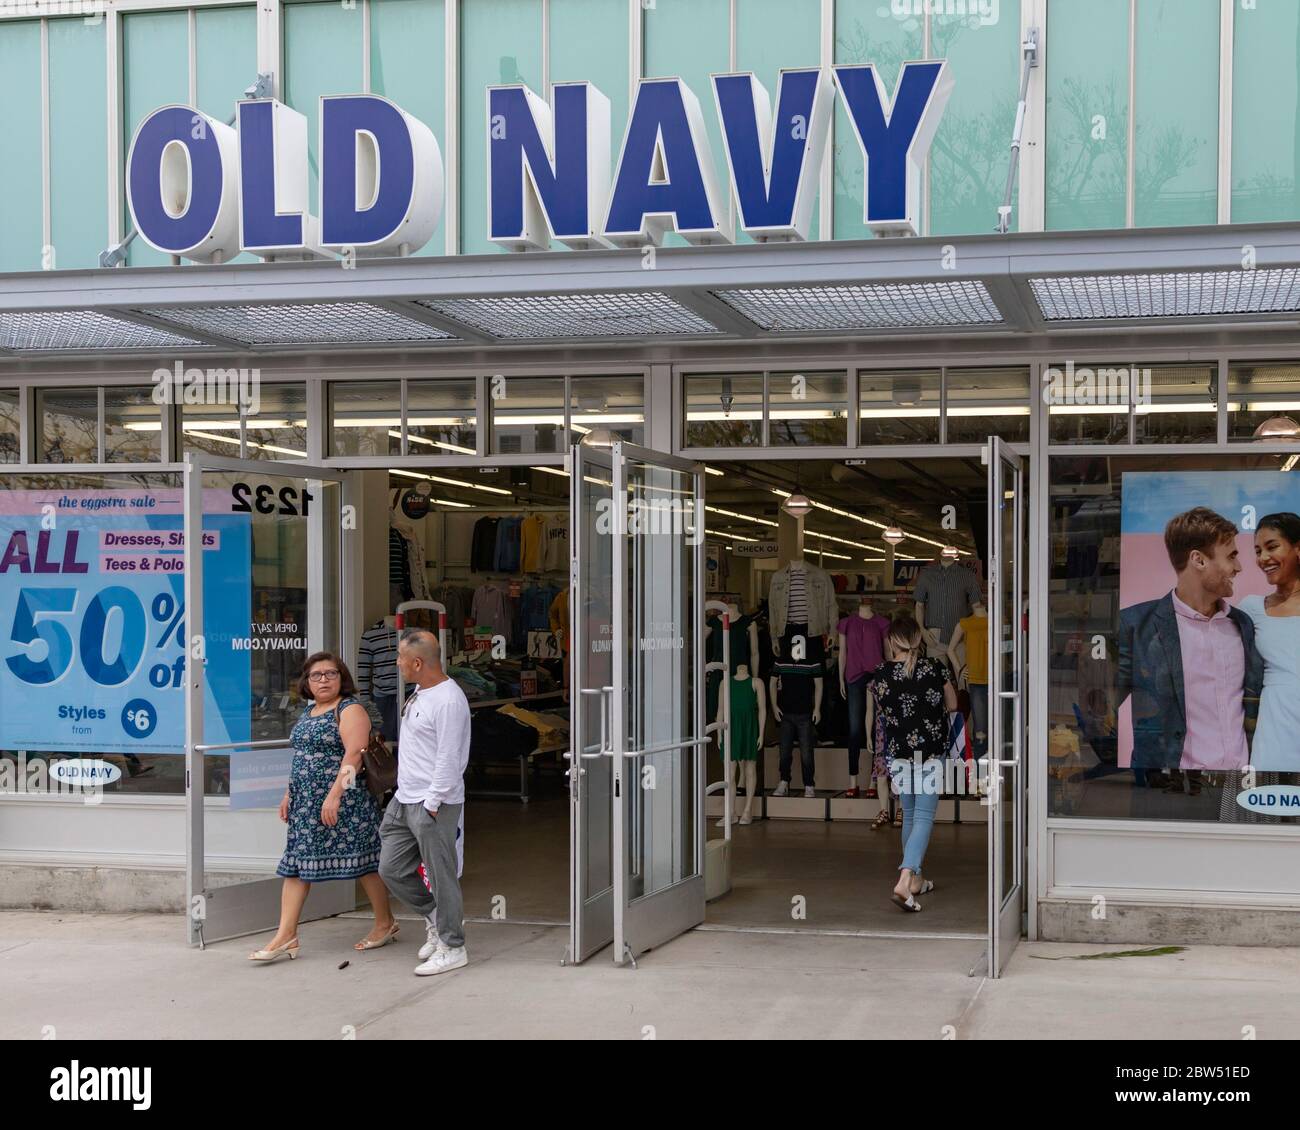 Santa Monica, California, USA. 15th Apr, 2019. Old Navy is an American clothing and accessories retailing company owned by American multinational corporation Gap Inc. It has corporate operations in the Mission Bay neighborhood of San Francisco, California. The largest of the Old Navy stores are its flagship stores, located in New York City, Seattle, Chicago, San Francisco, Manila, and Mexico City. Credit: Alexey Bychkov/ZUMA Wire/Alamy Live News Stock Photo